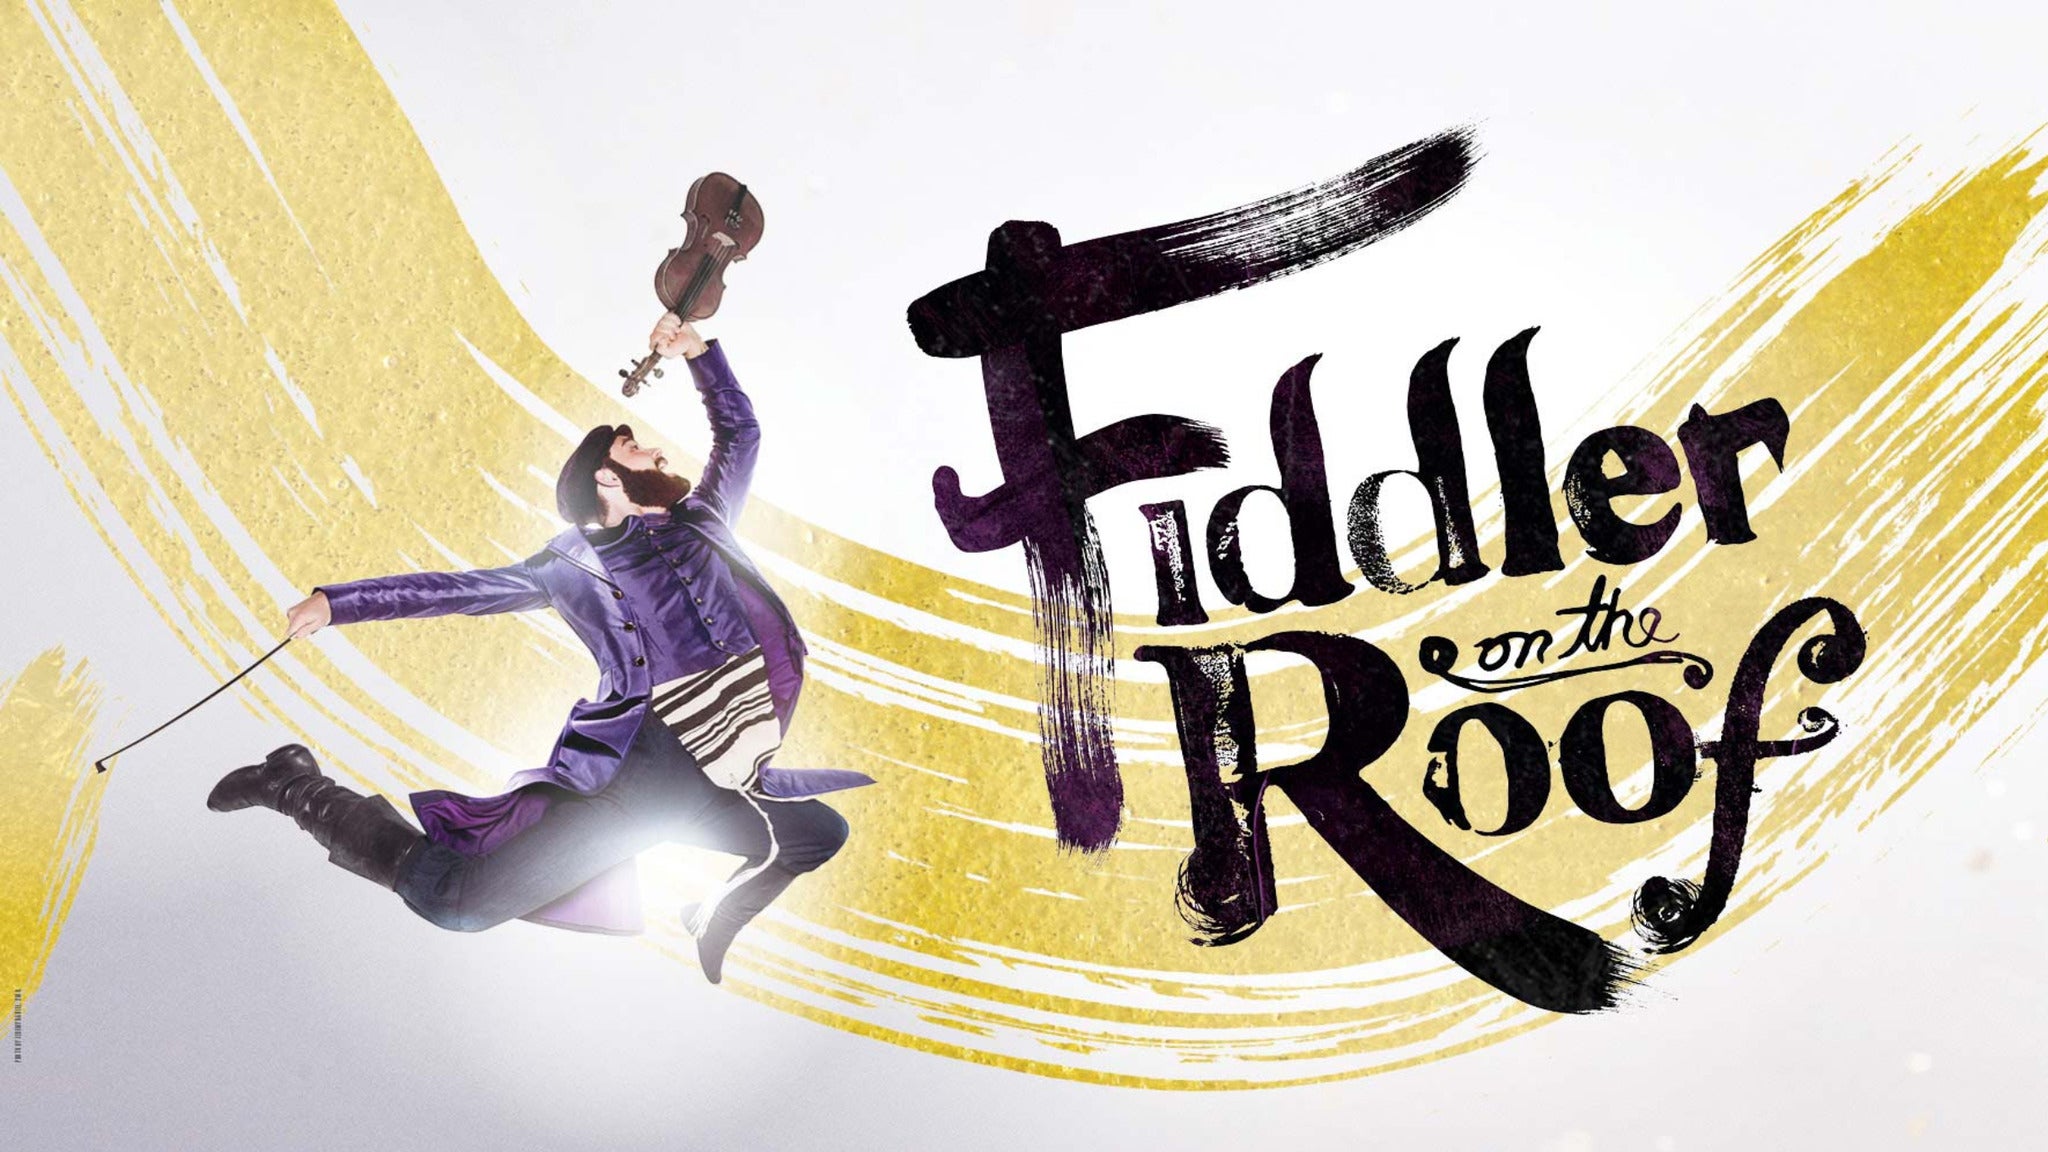 Fiddler On The Roof at State Farm Center